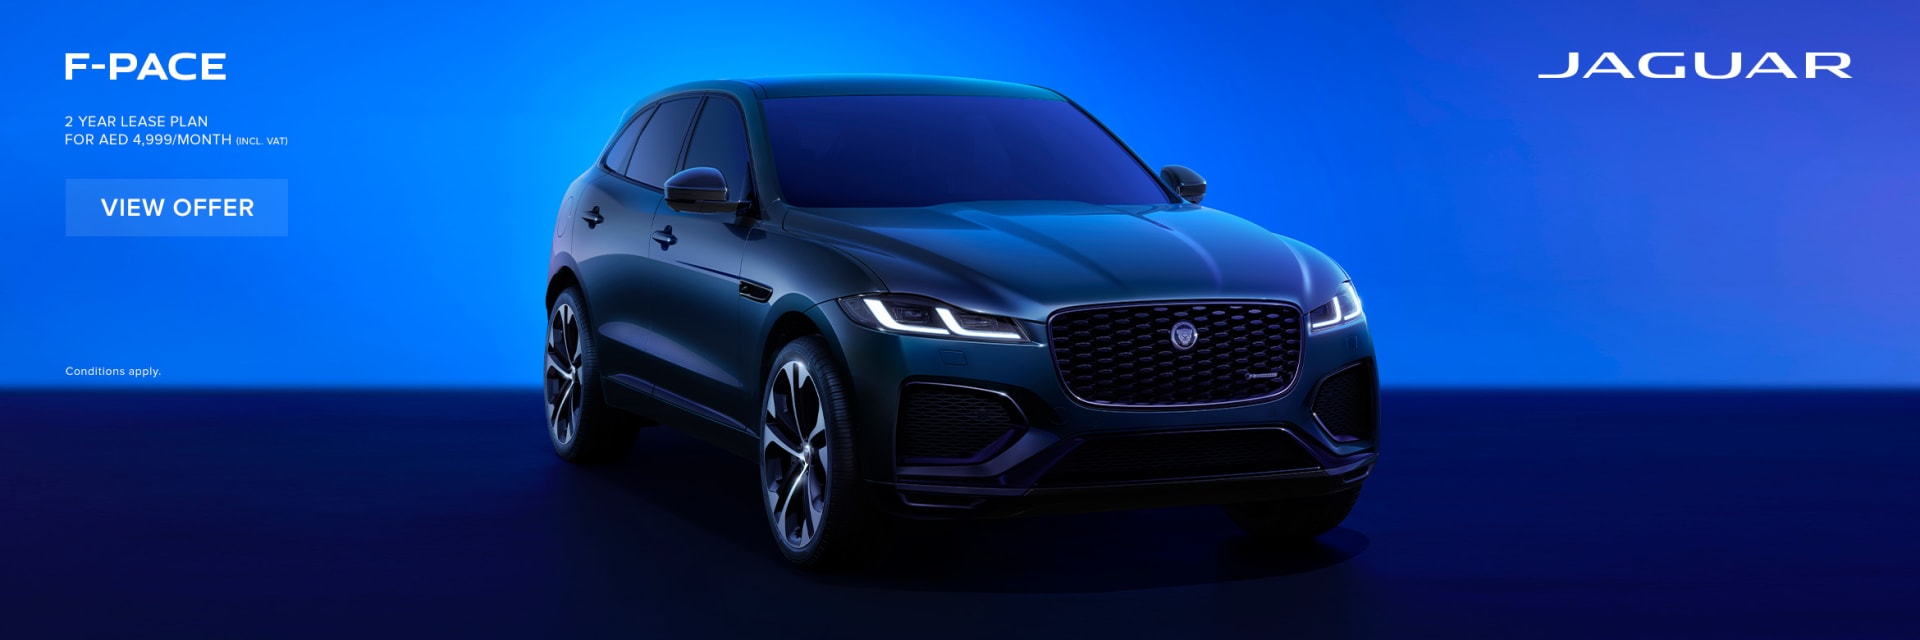 FPace 